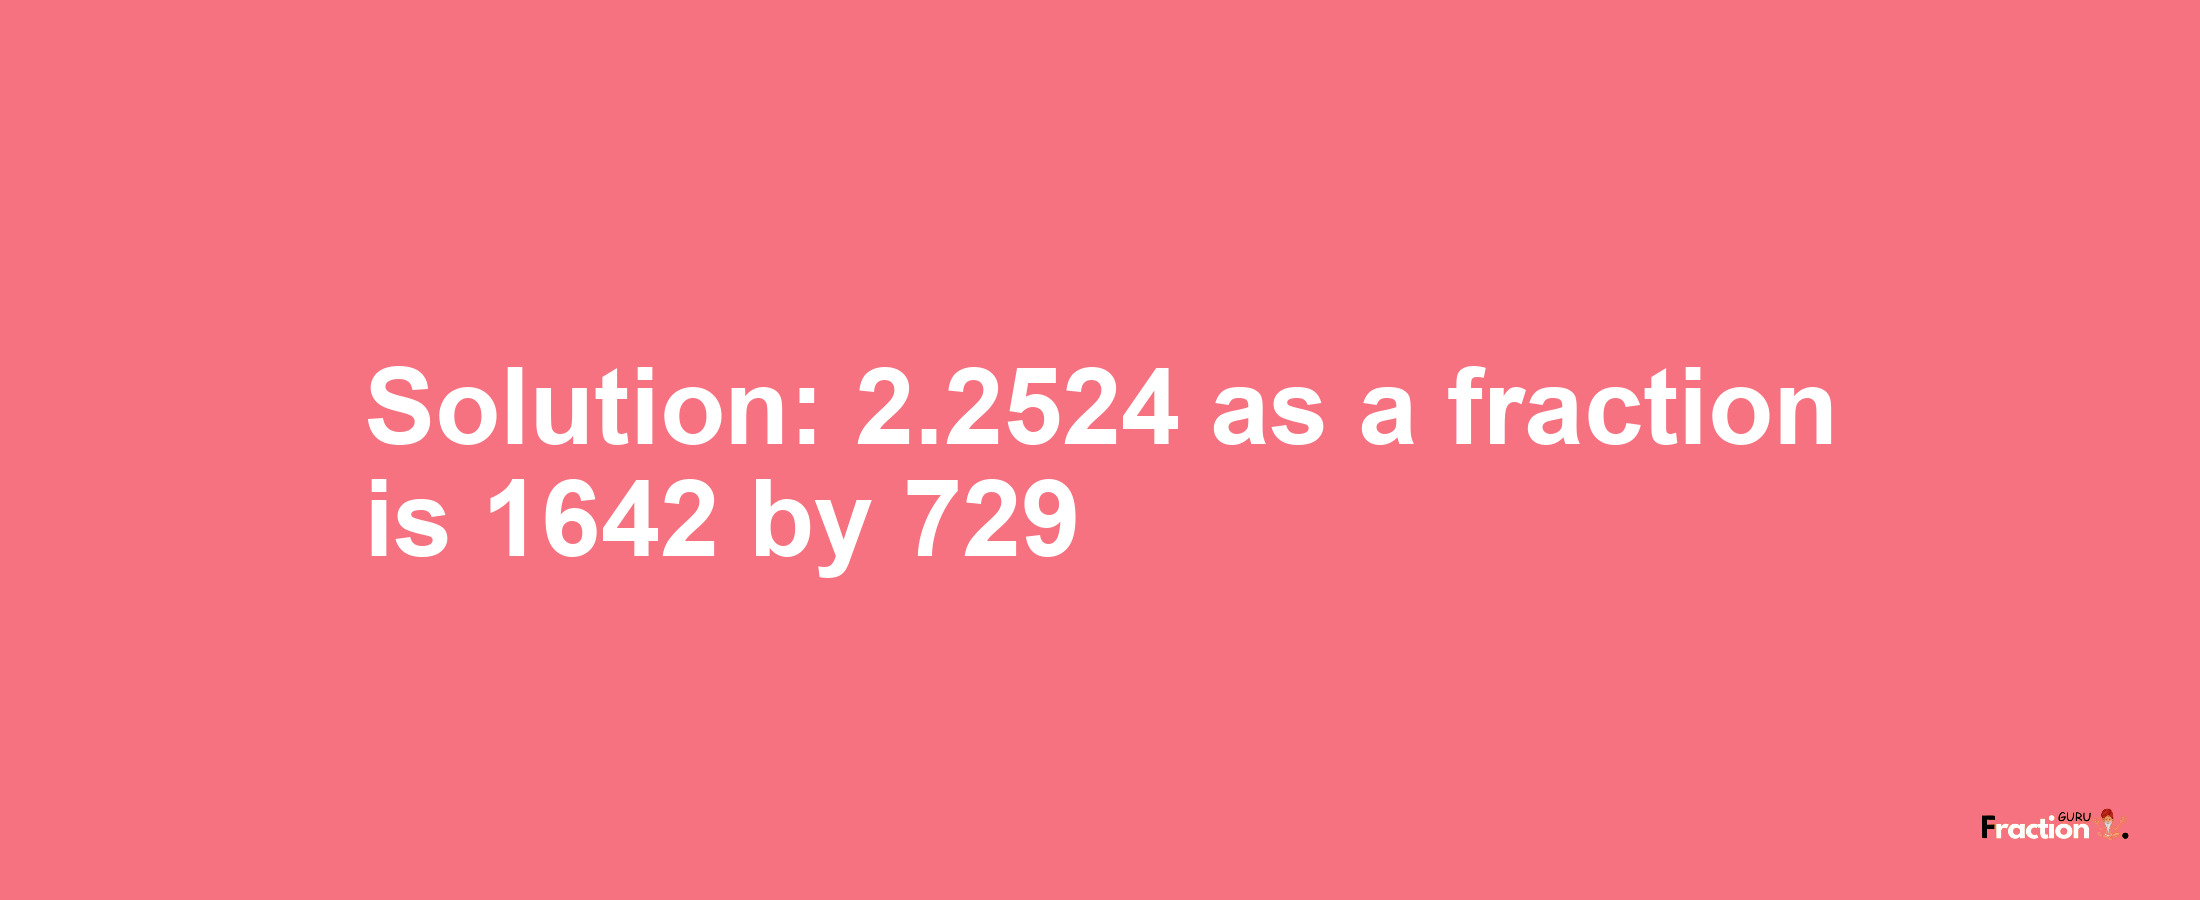 Solution:2.2524 as a fraction is 1642/729